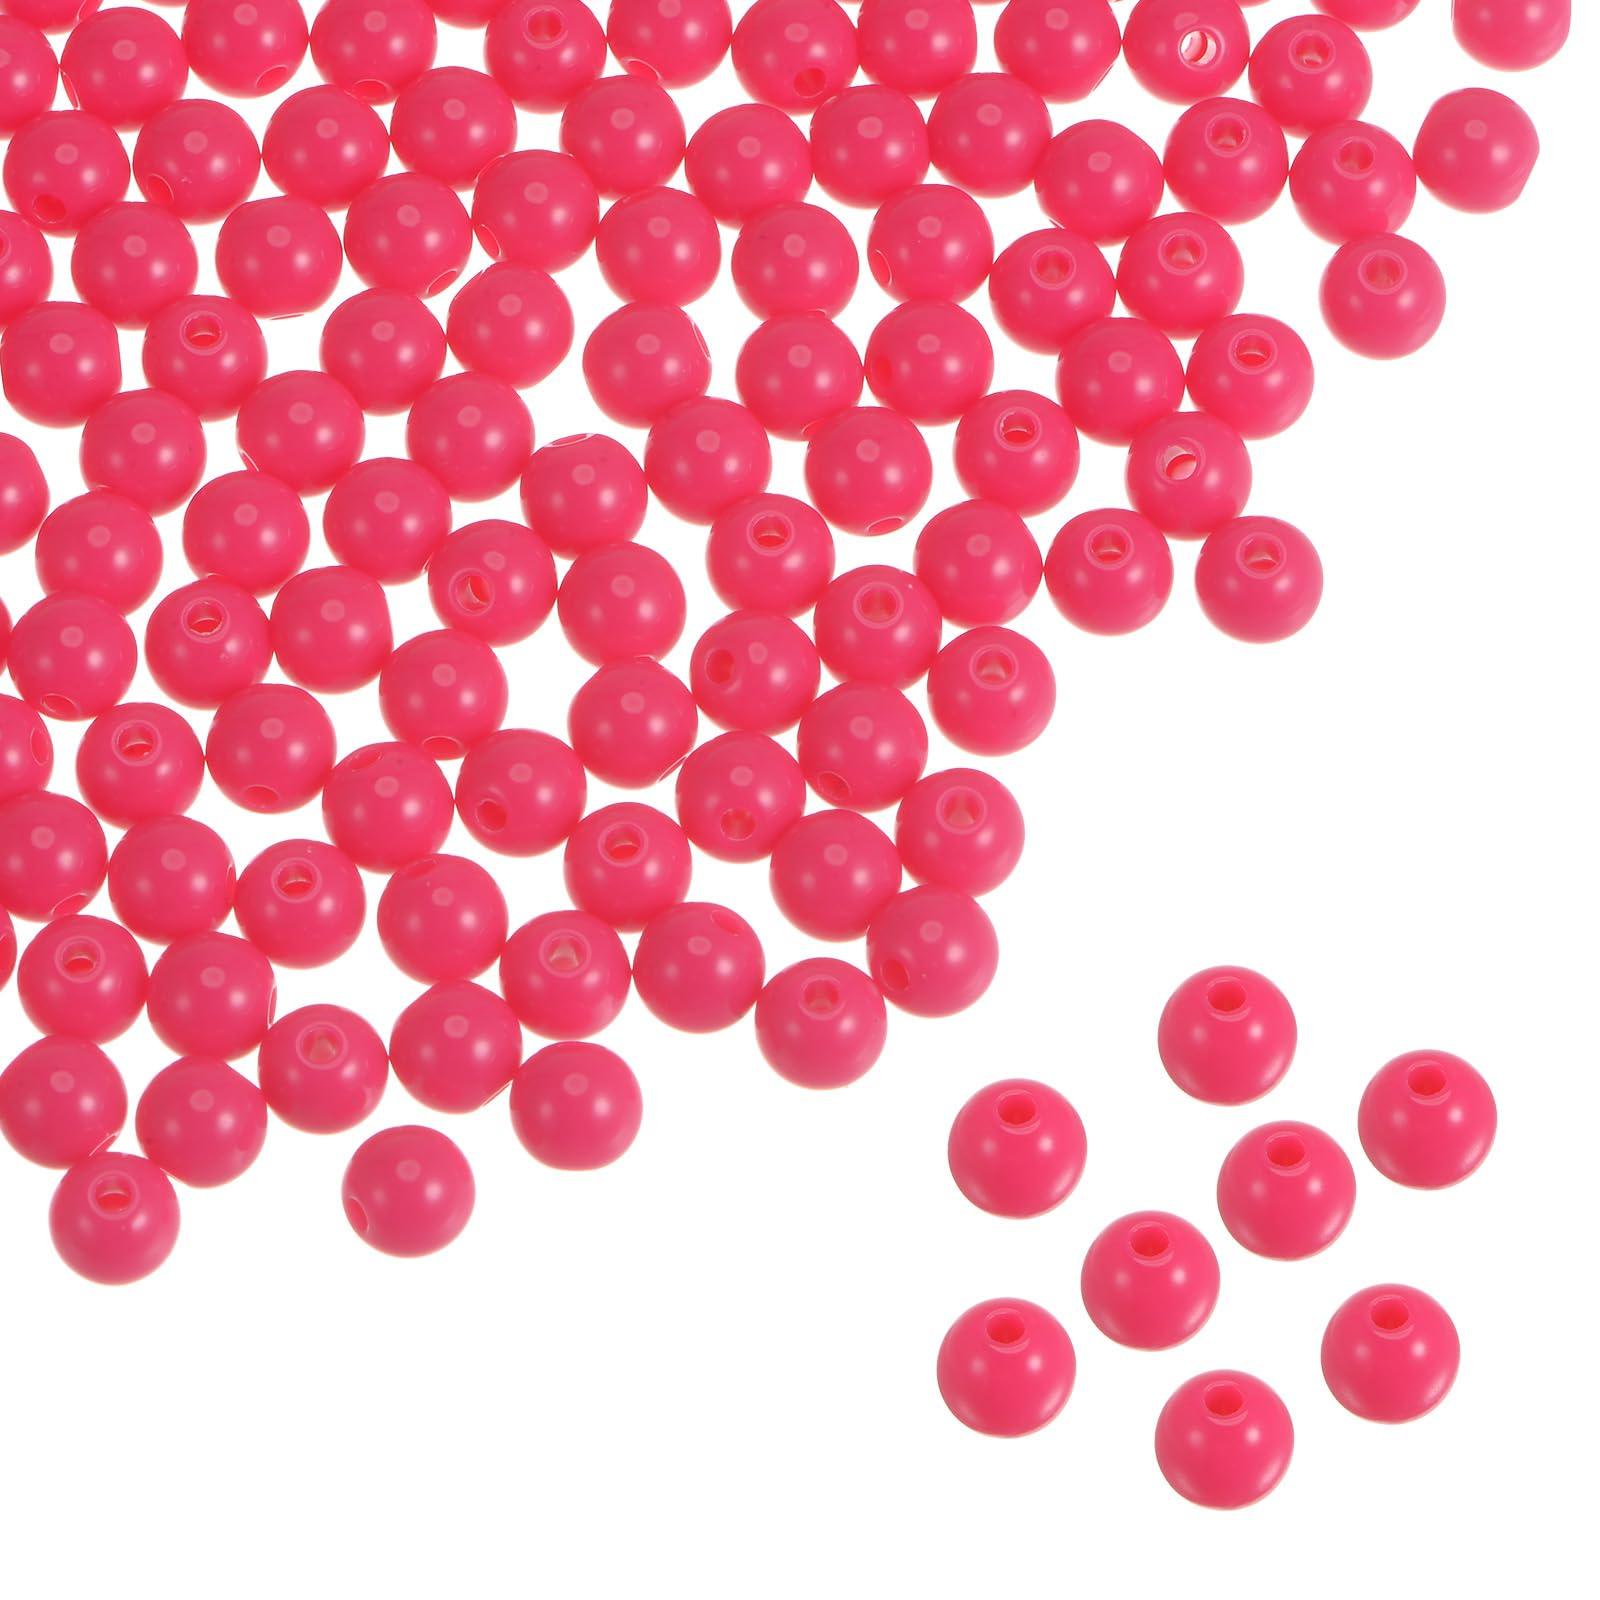 sourcing map 4200pcs Acrylic Round Beads 6mm Loose Bubble Craft Bead Assorted Candy Color for DIY Bracelet Earring Necklace Jewelry Making, Rose Red